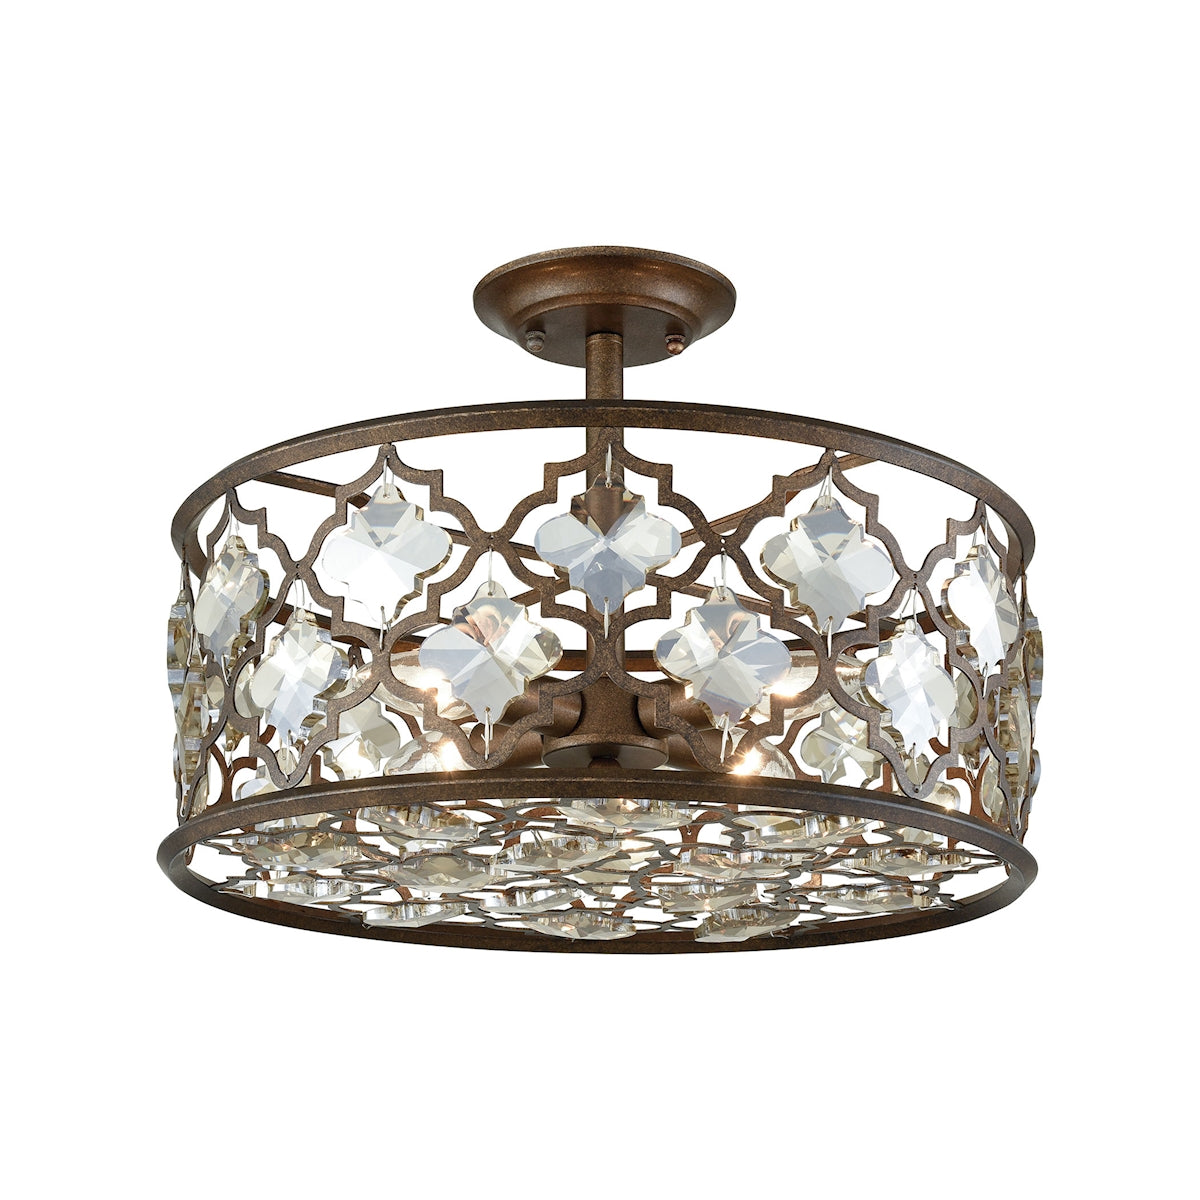 ELK Lighting 31092/4 Armand 4-Light Semi Flush in Weathered Bronze with Champagne-plated Crystals